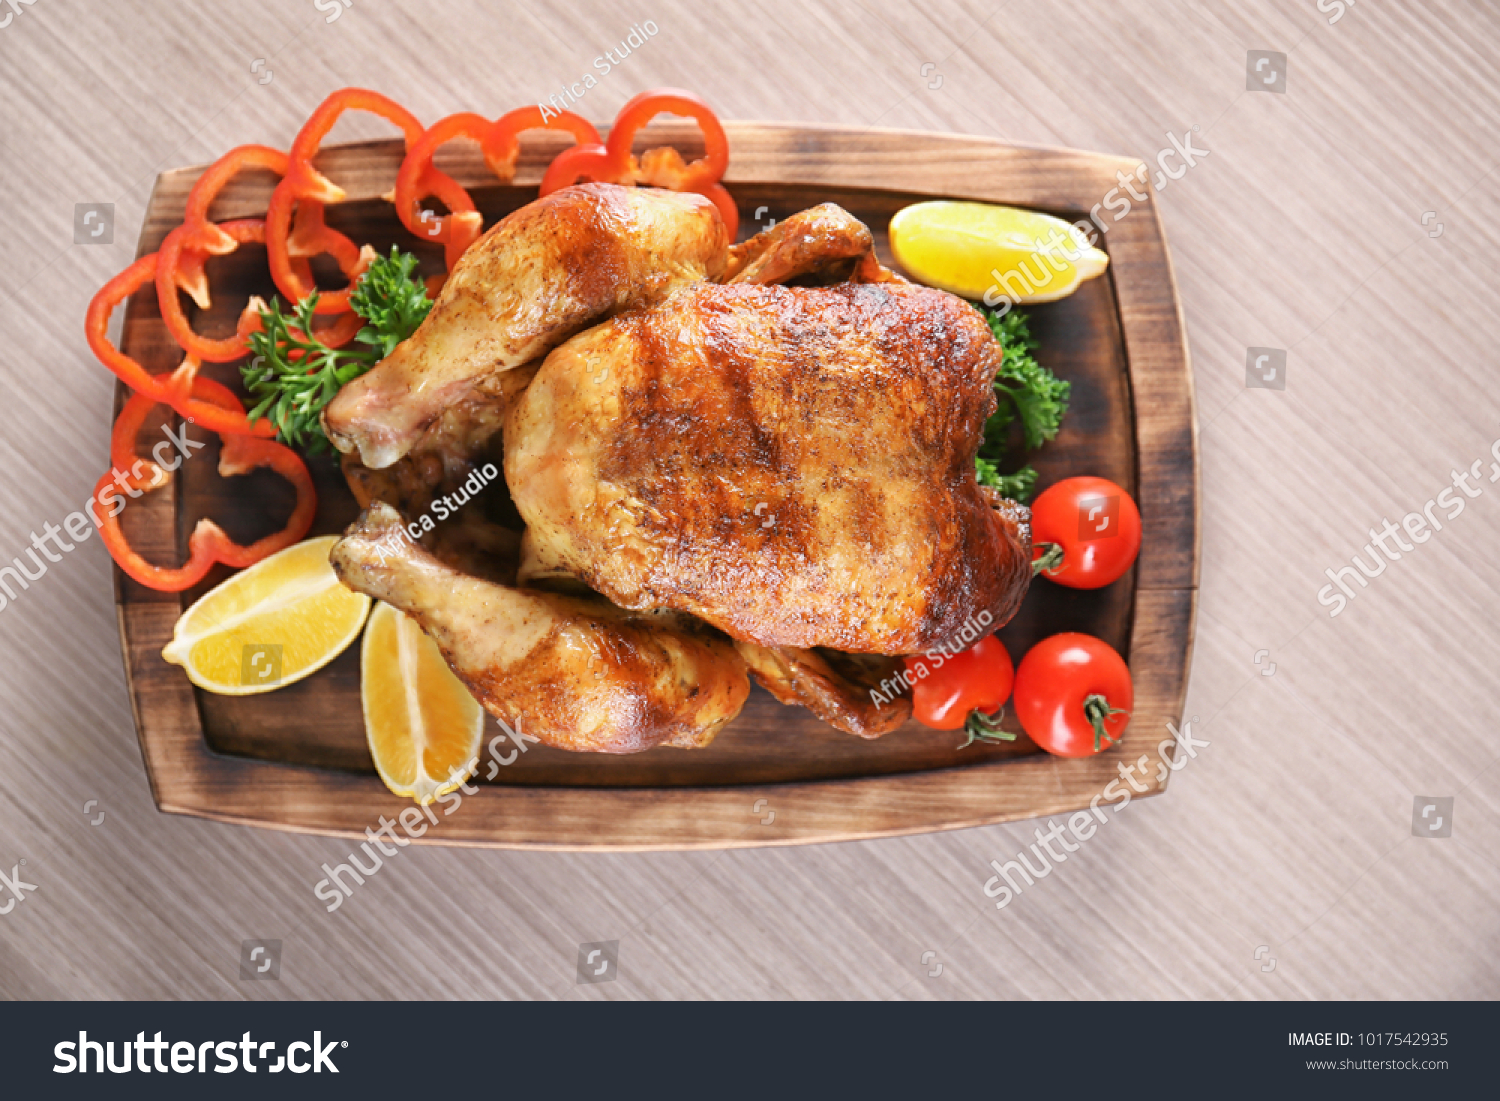 Delicious whole roasted chicken with vegetables served on wooden board #1017542935